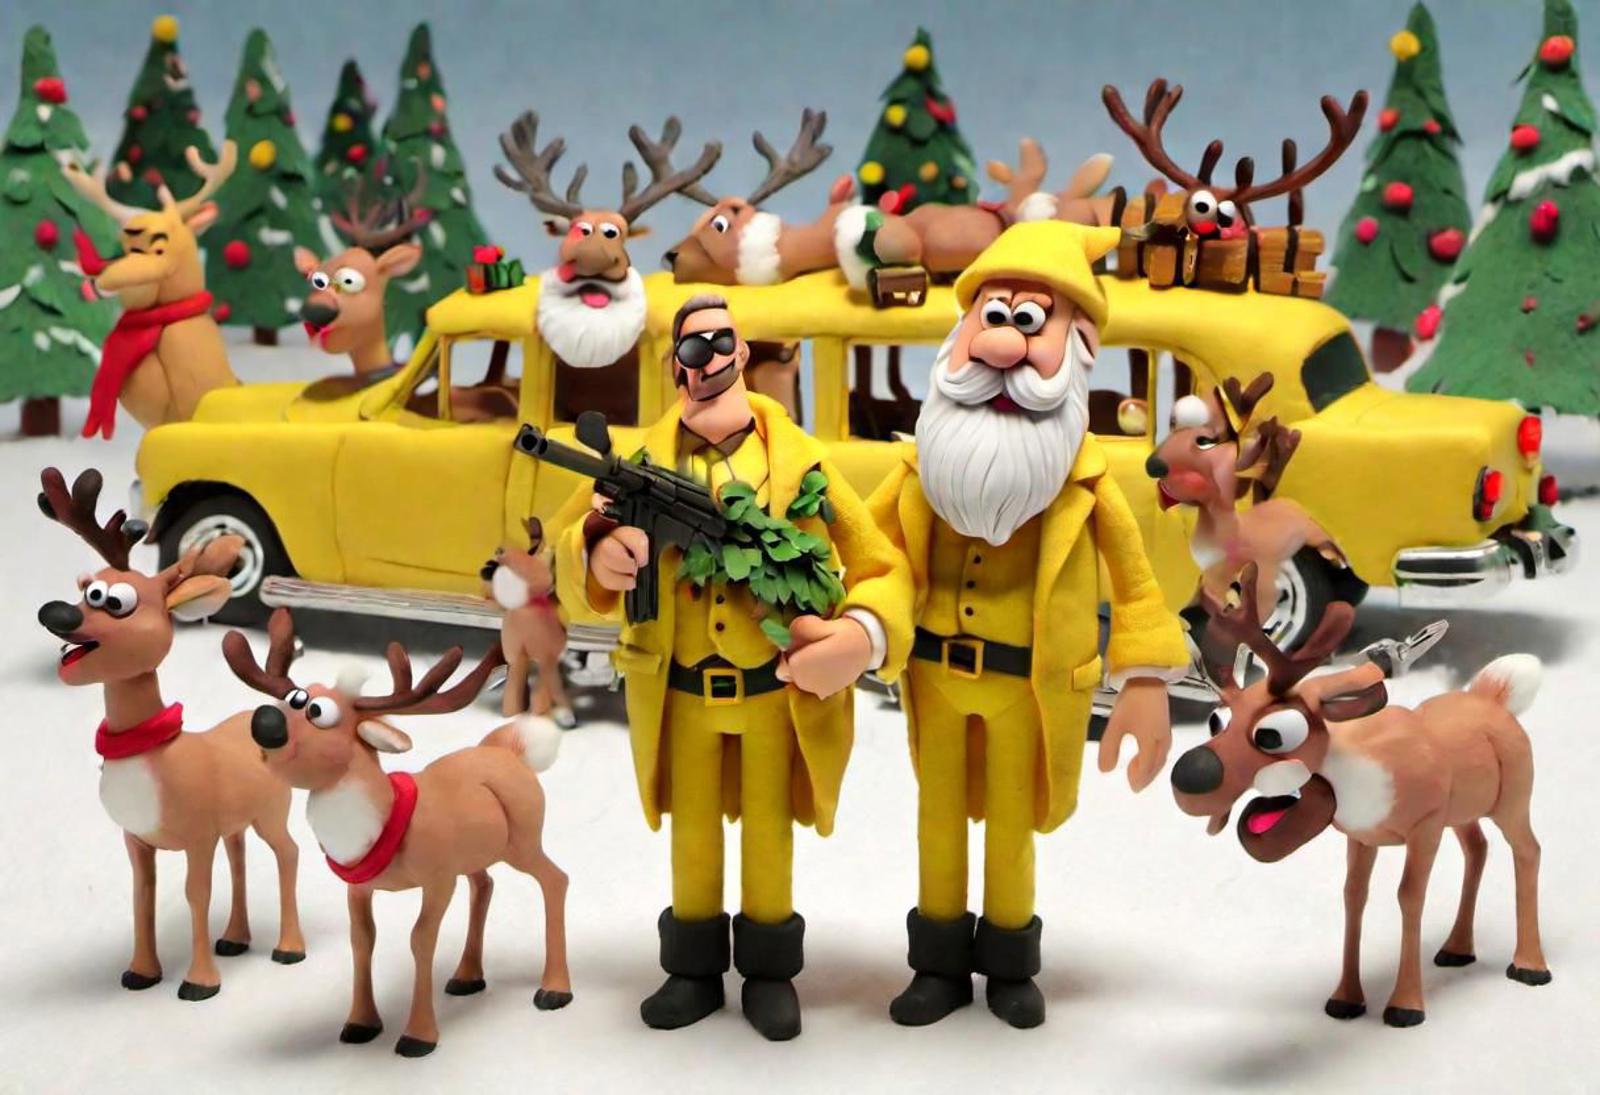 A Christmas scene featuring a yellow car with Santa Claus and a reindeer.